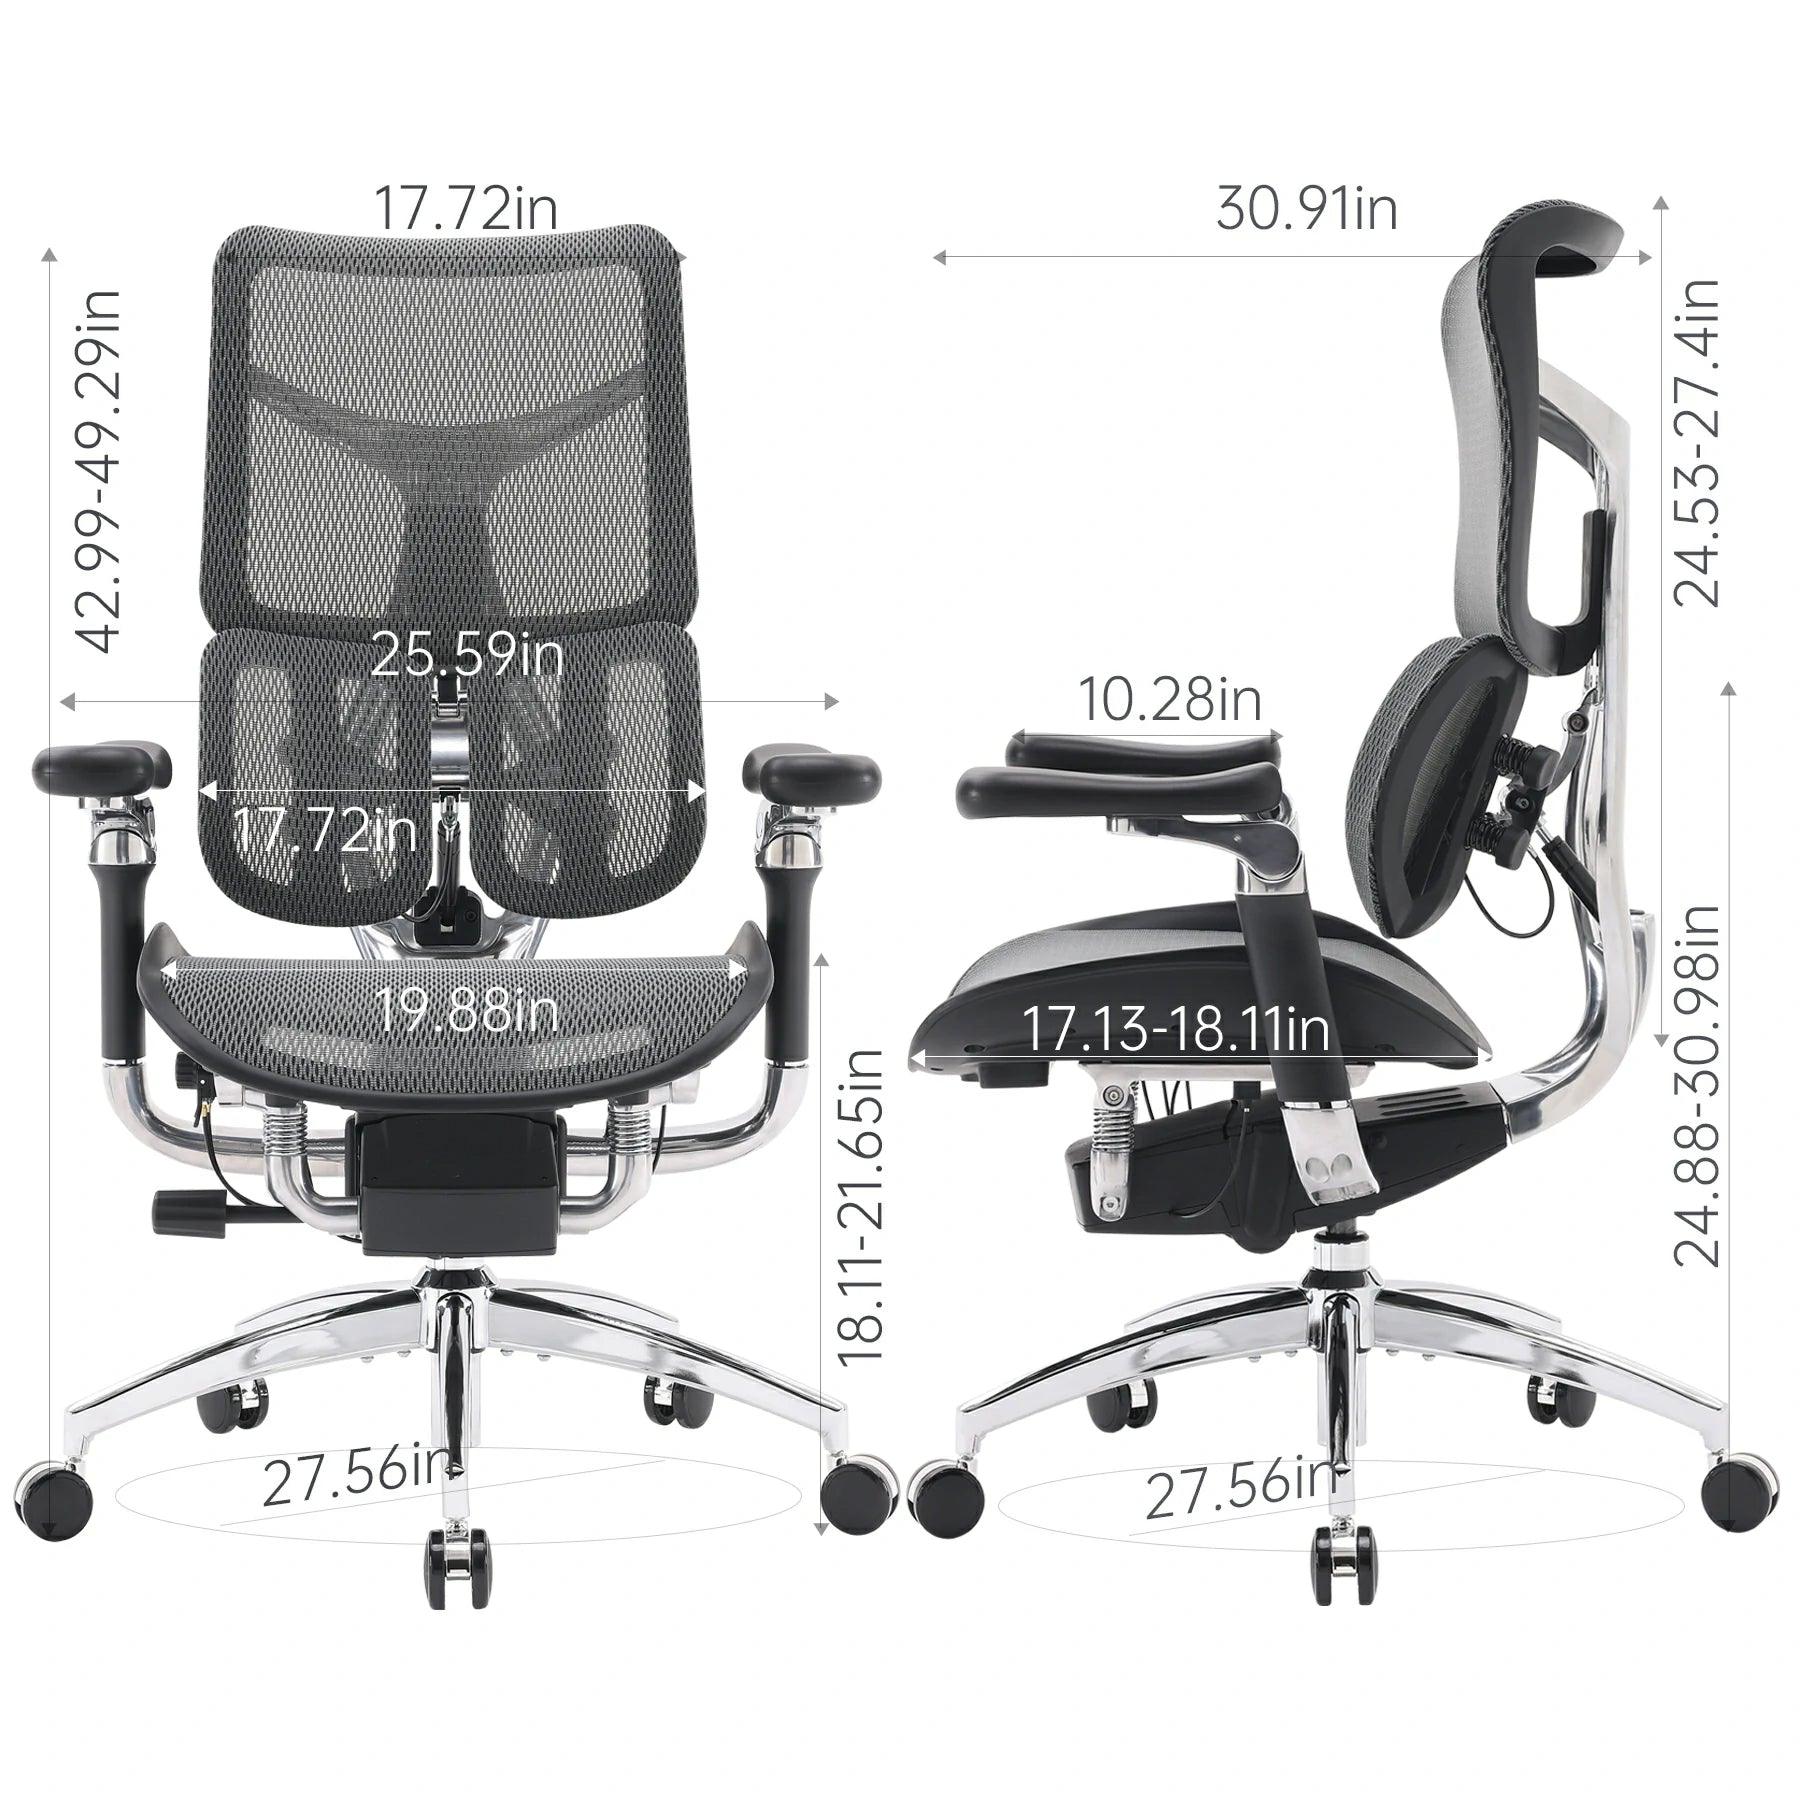 SIHOO M57 Ergonomic Office Chair with 3 Way Armrests UK